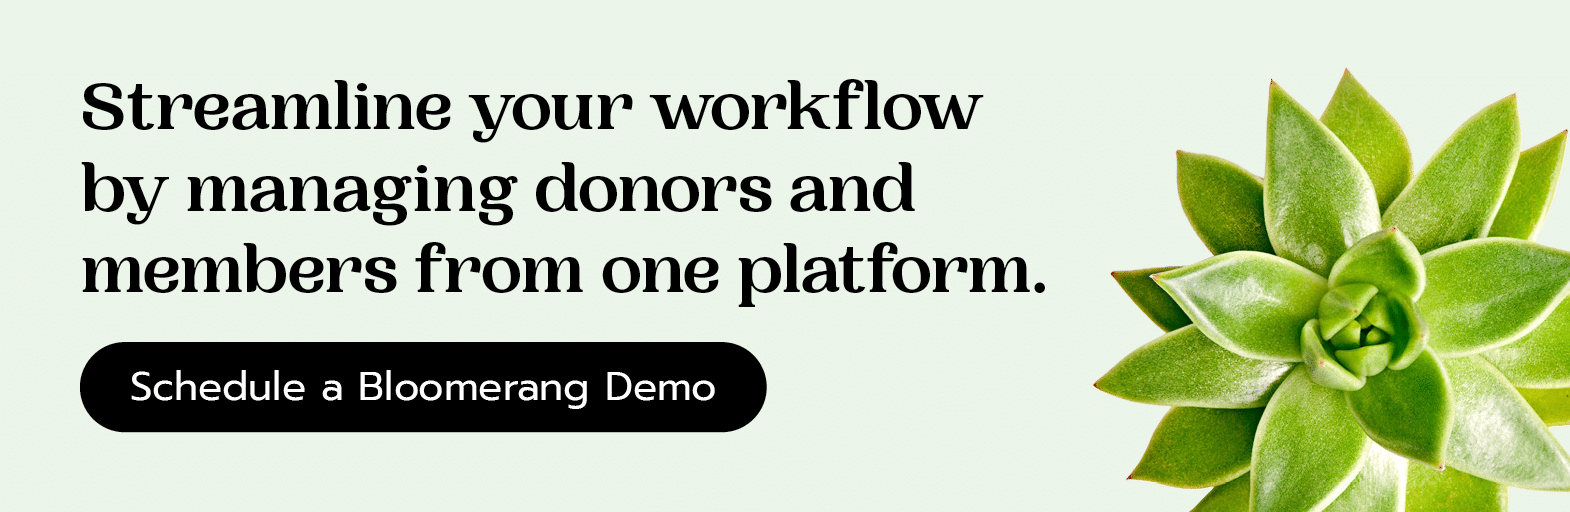 Streamline workflows by managing donors and members from one platform. Schedule a Bloomerang Demo here.